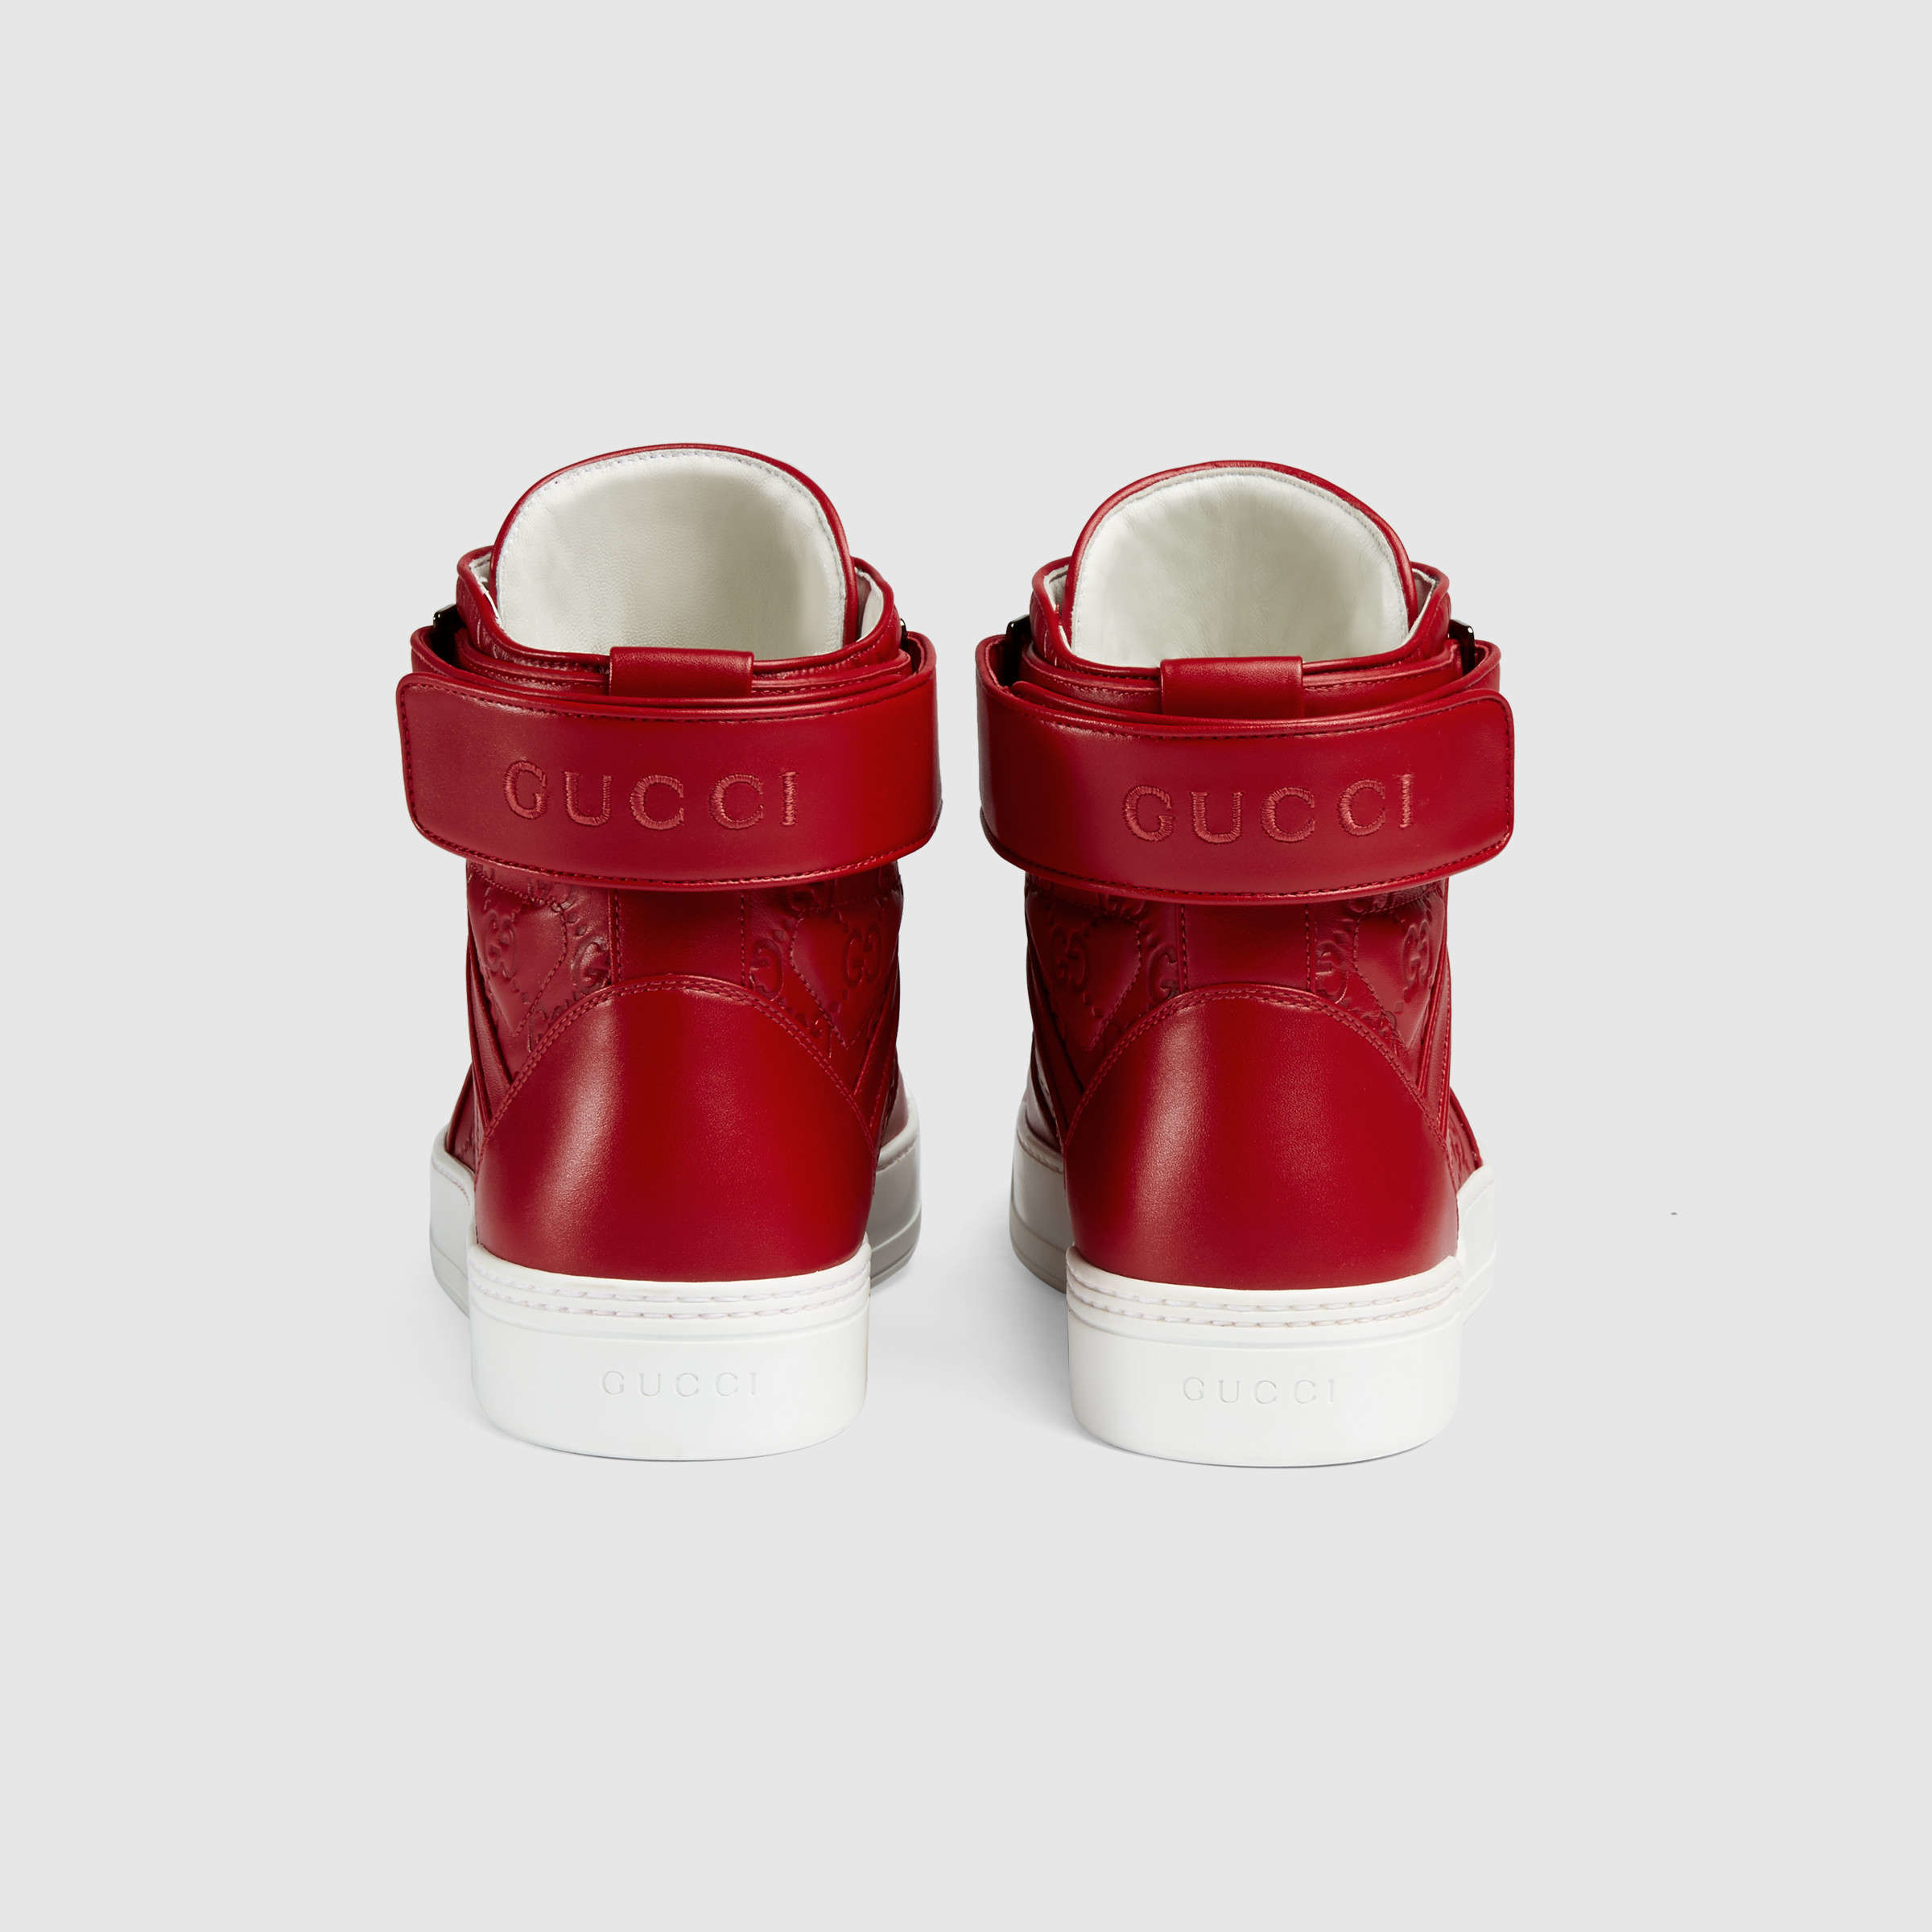 Gucci Signature Slip-on Sneaker in Red